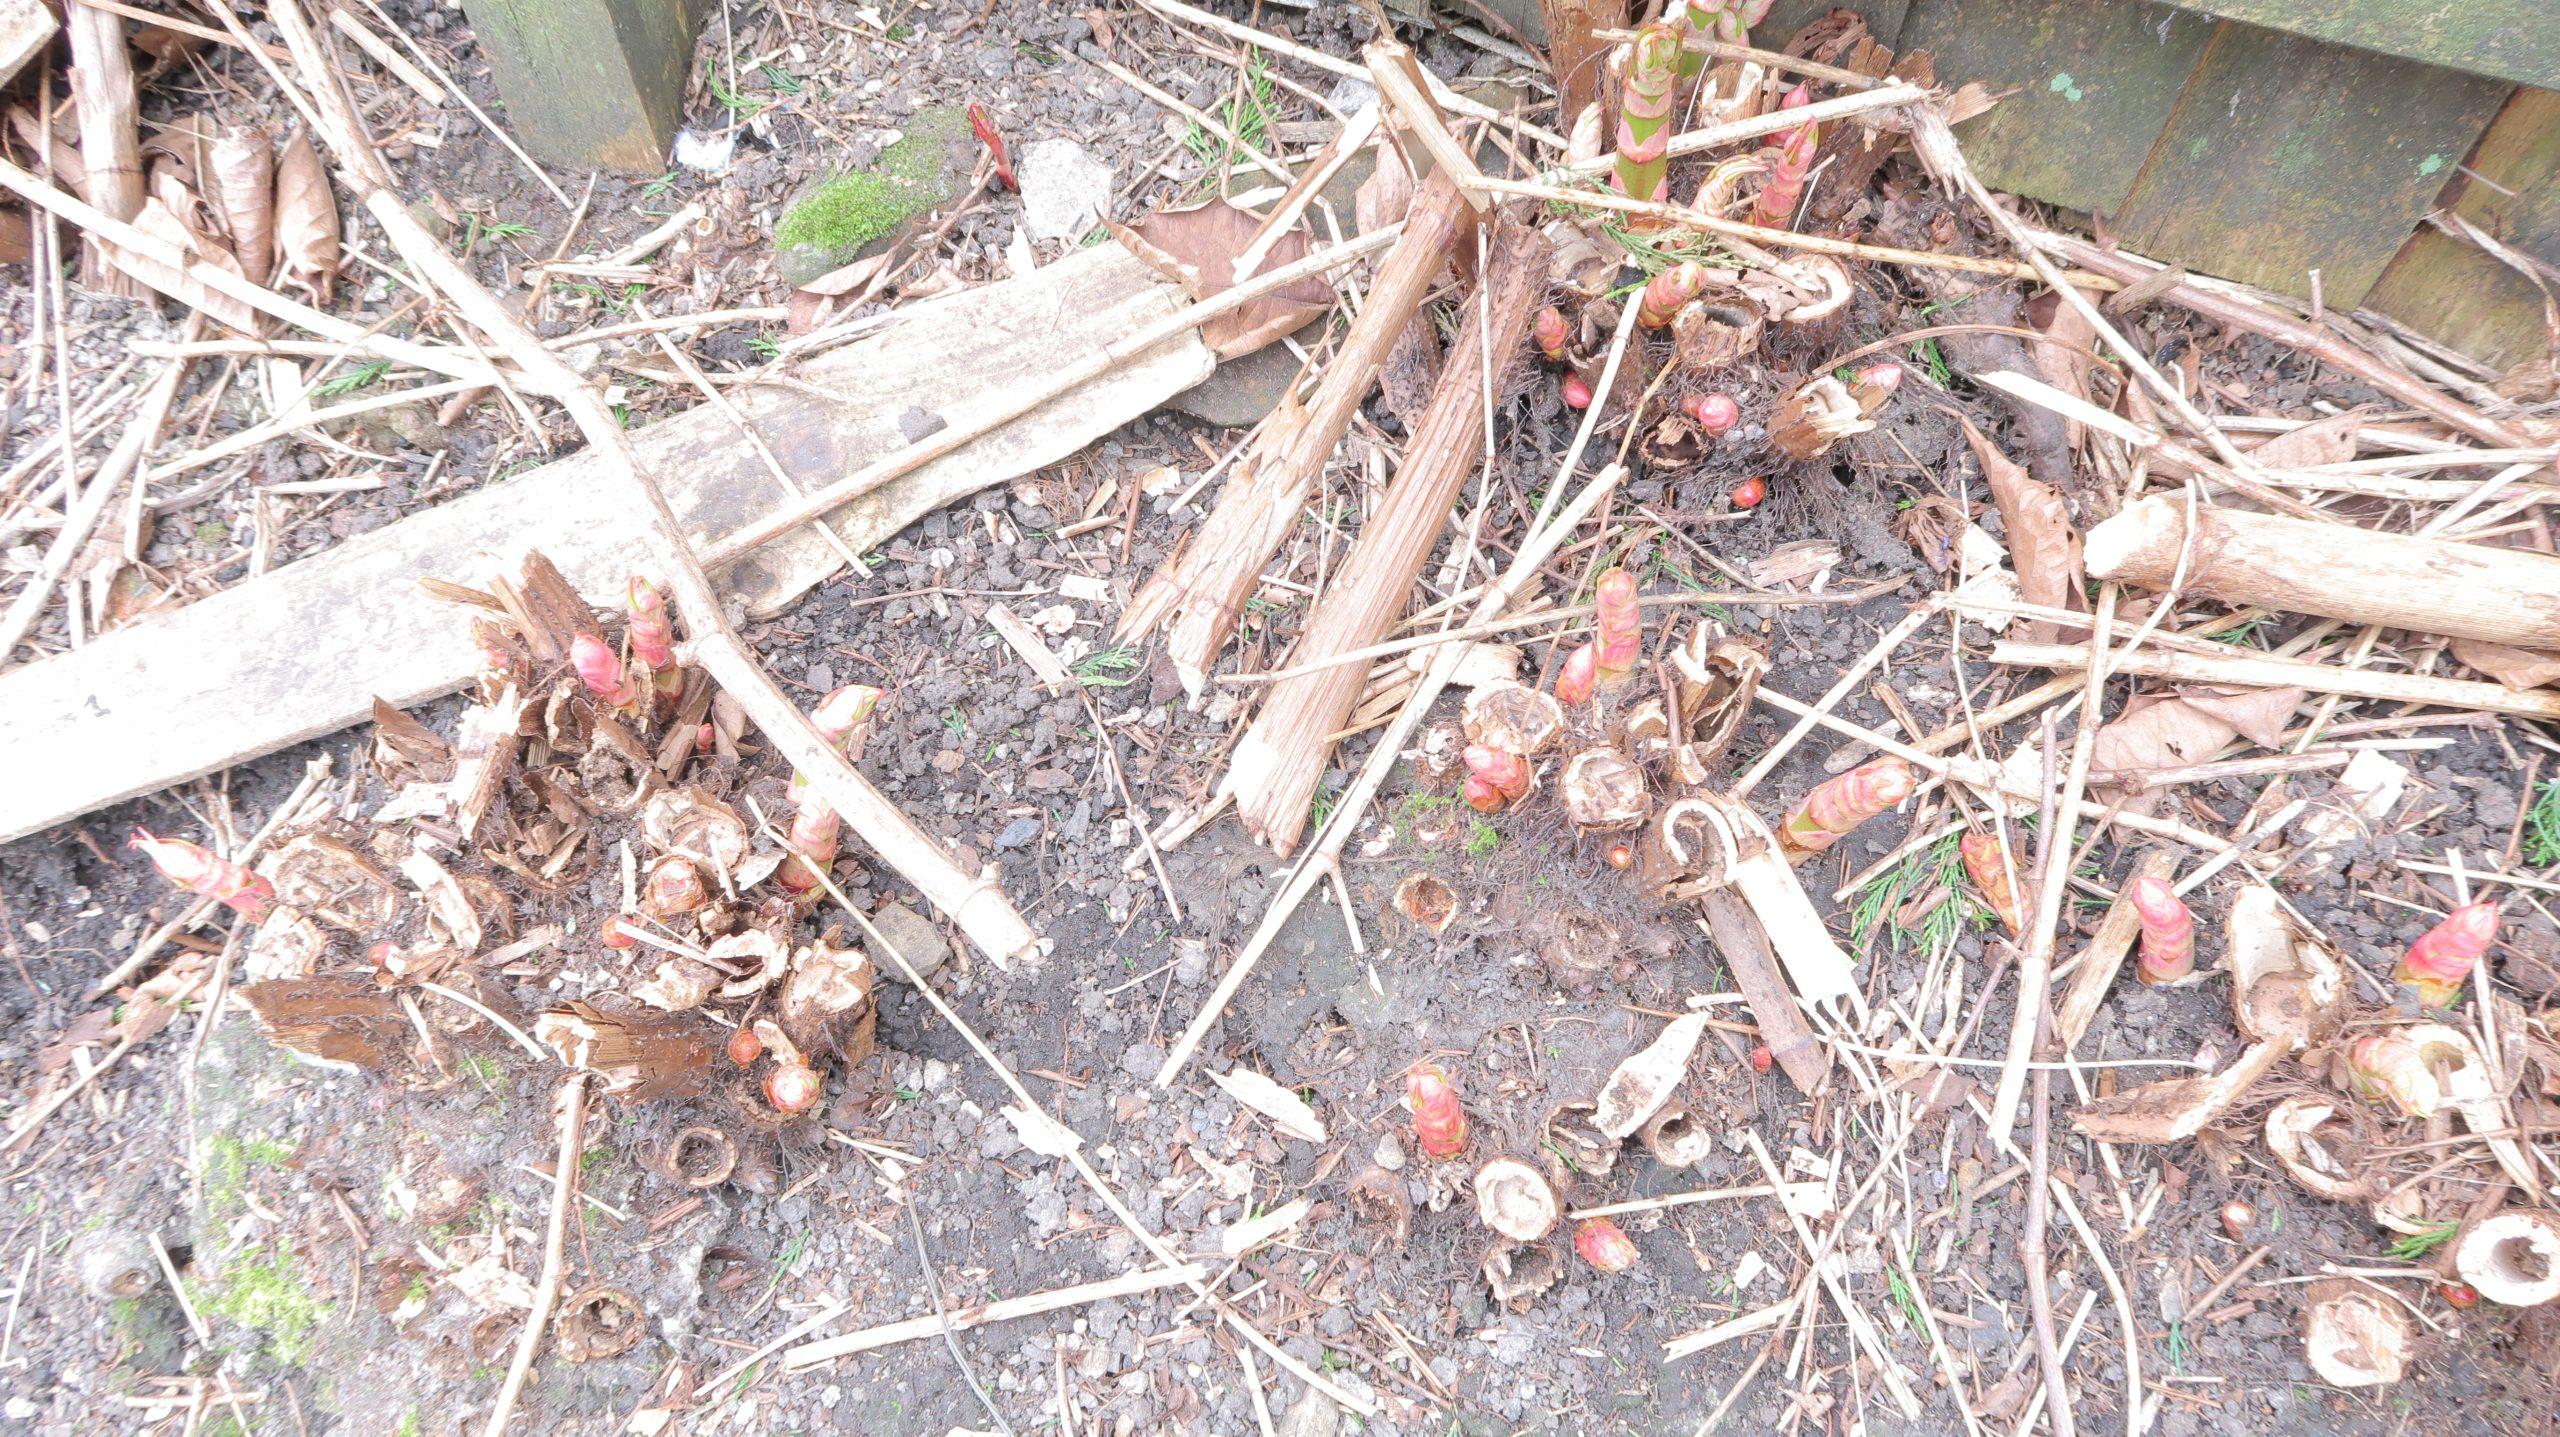 Japanese knotweed buds and shoots growing quickly during April and concentrated in their development